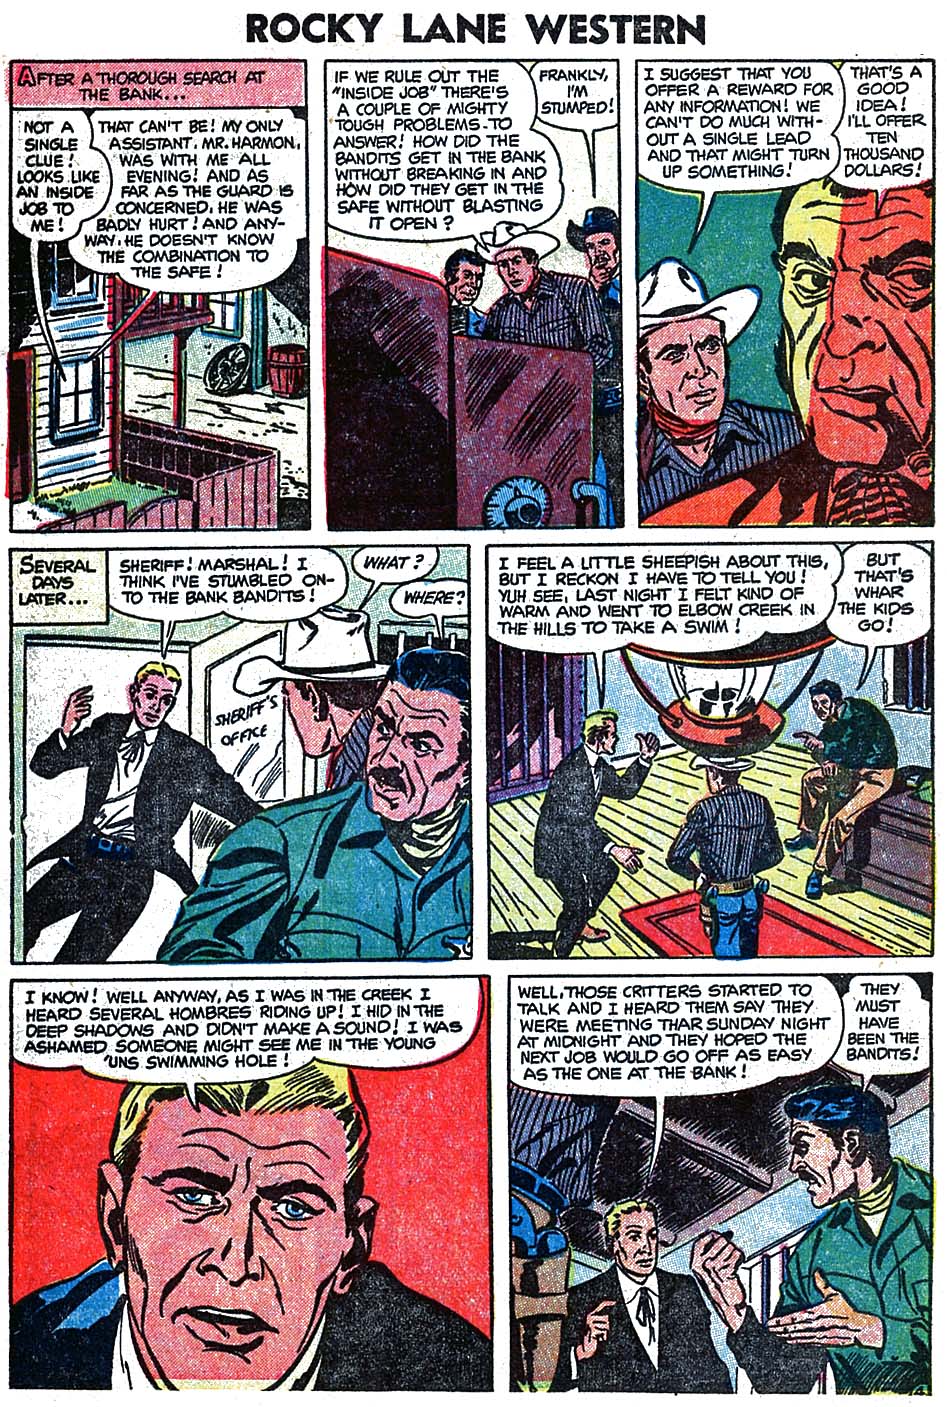 Rocky Lane Western (1954) issue 60 - Page 5